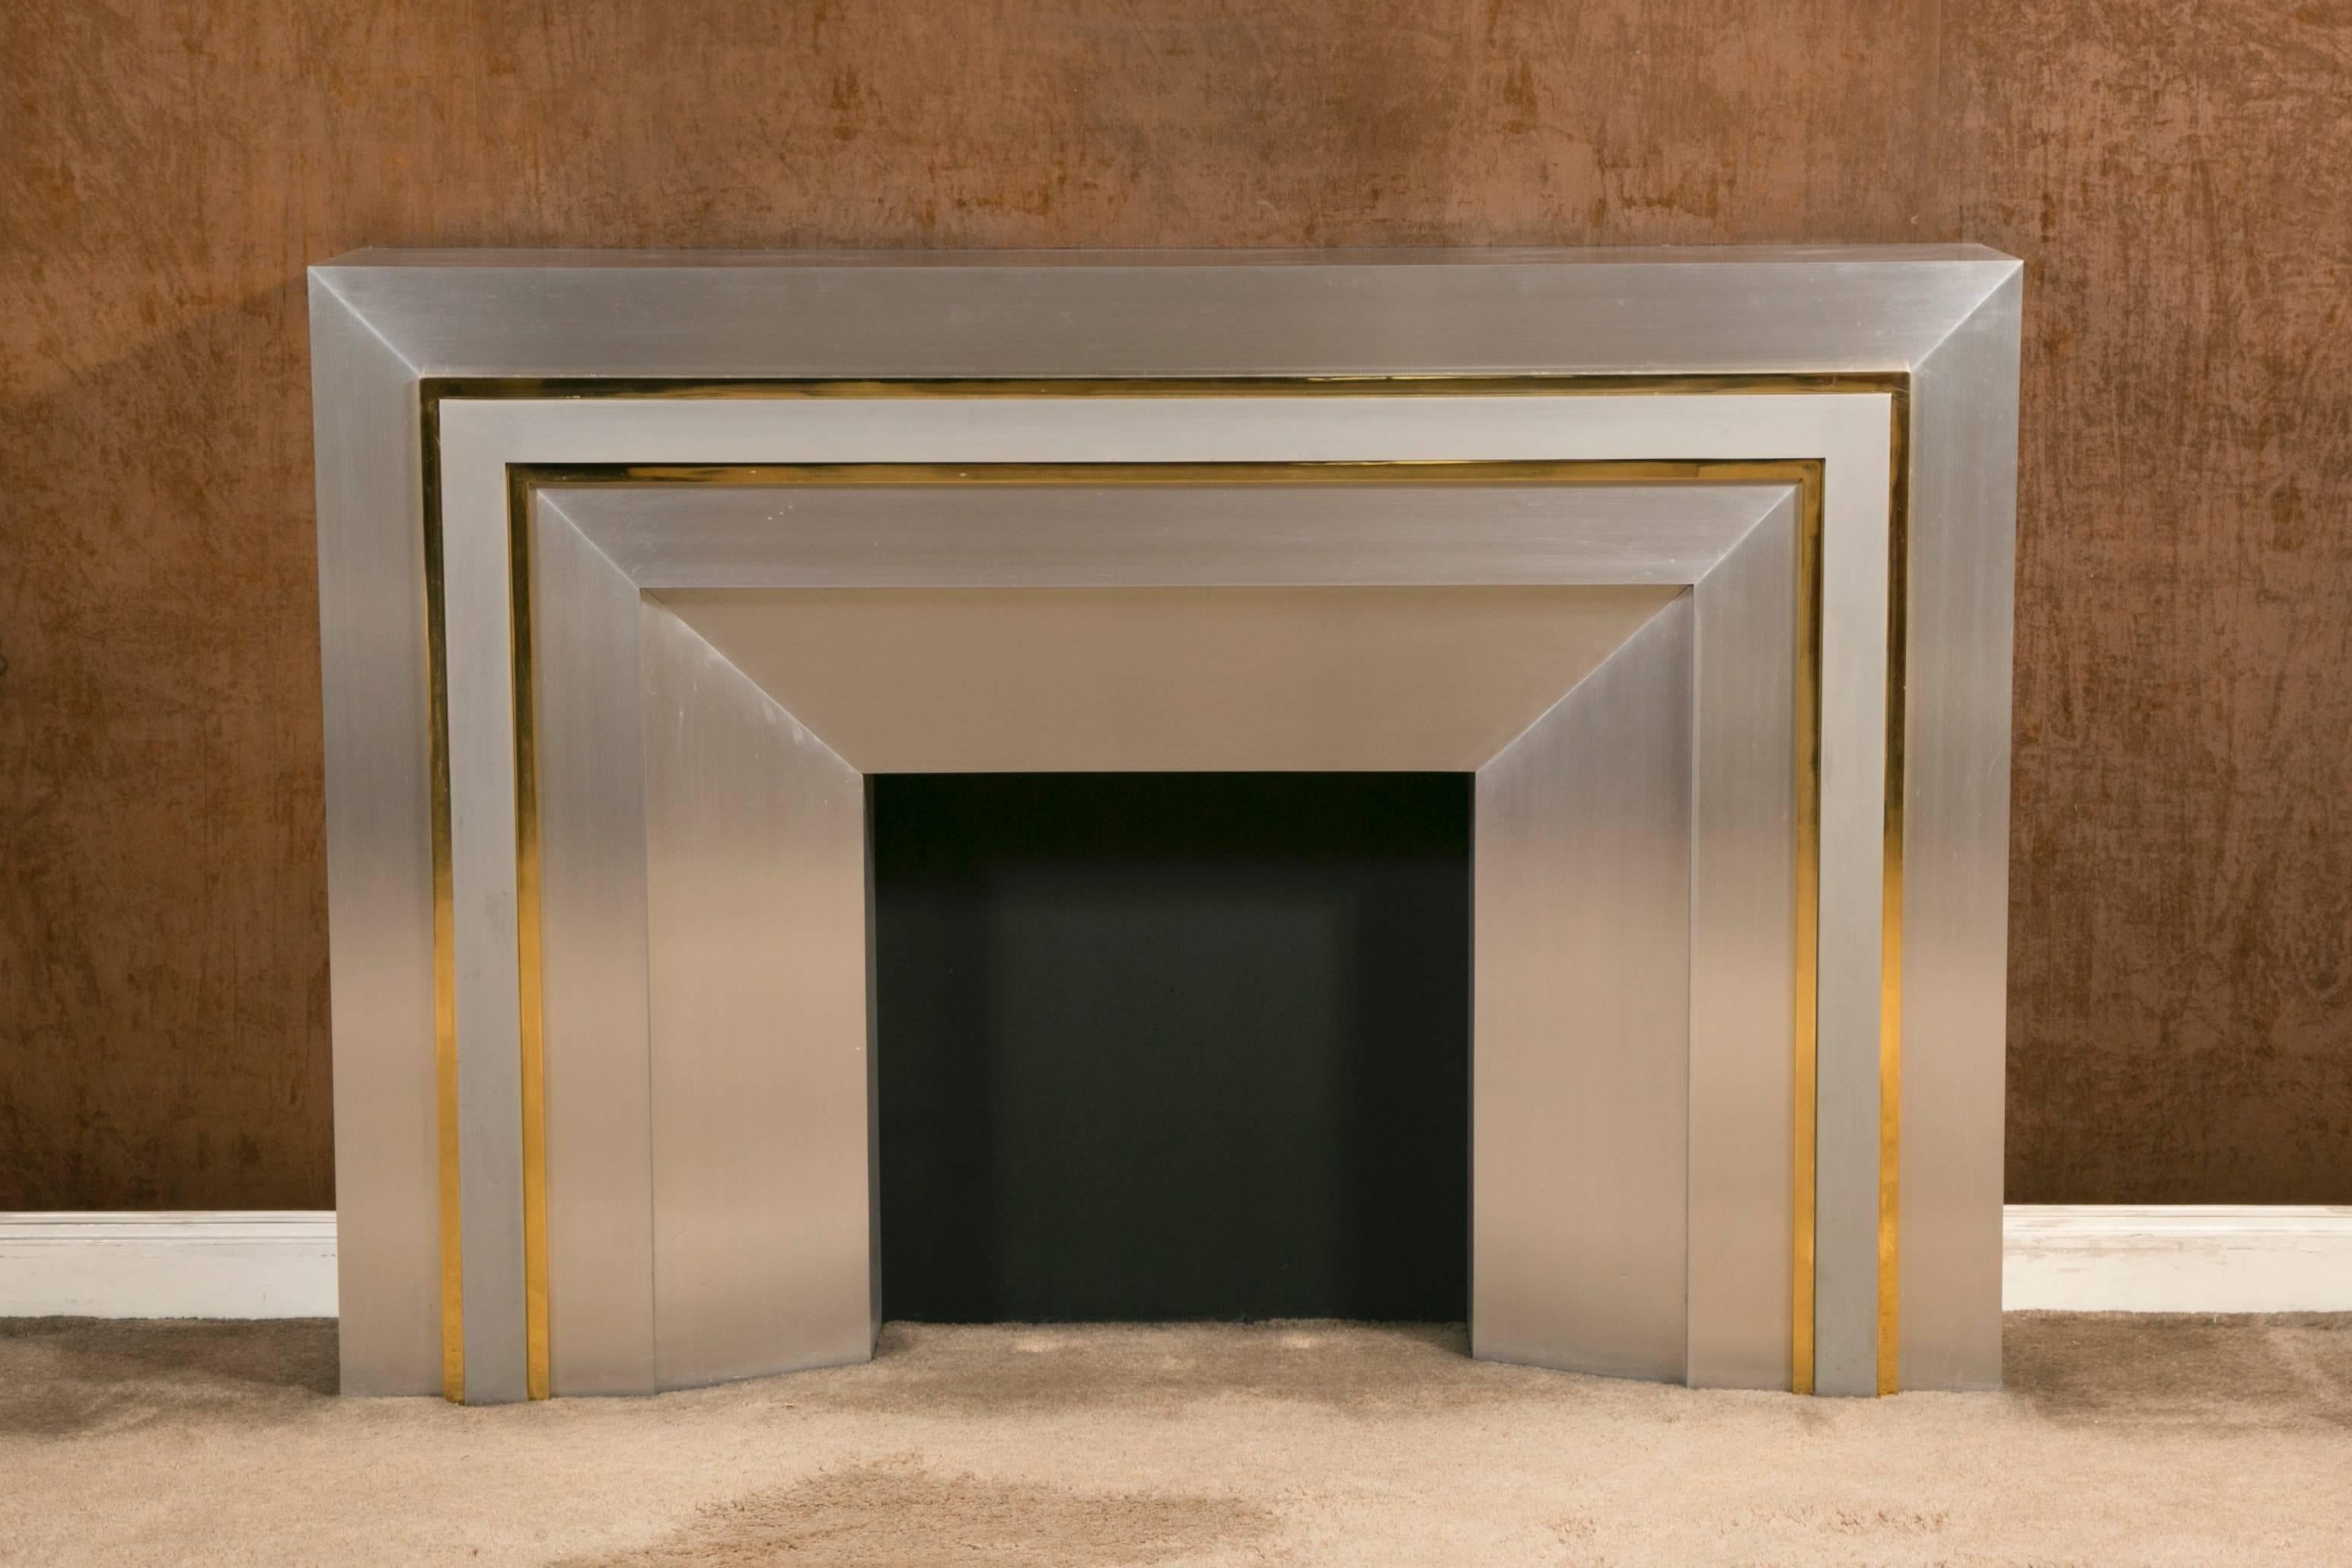 Large decorative modern fire mantel, with a brushed aluminium finish and polished brass frames.